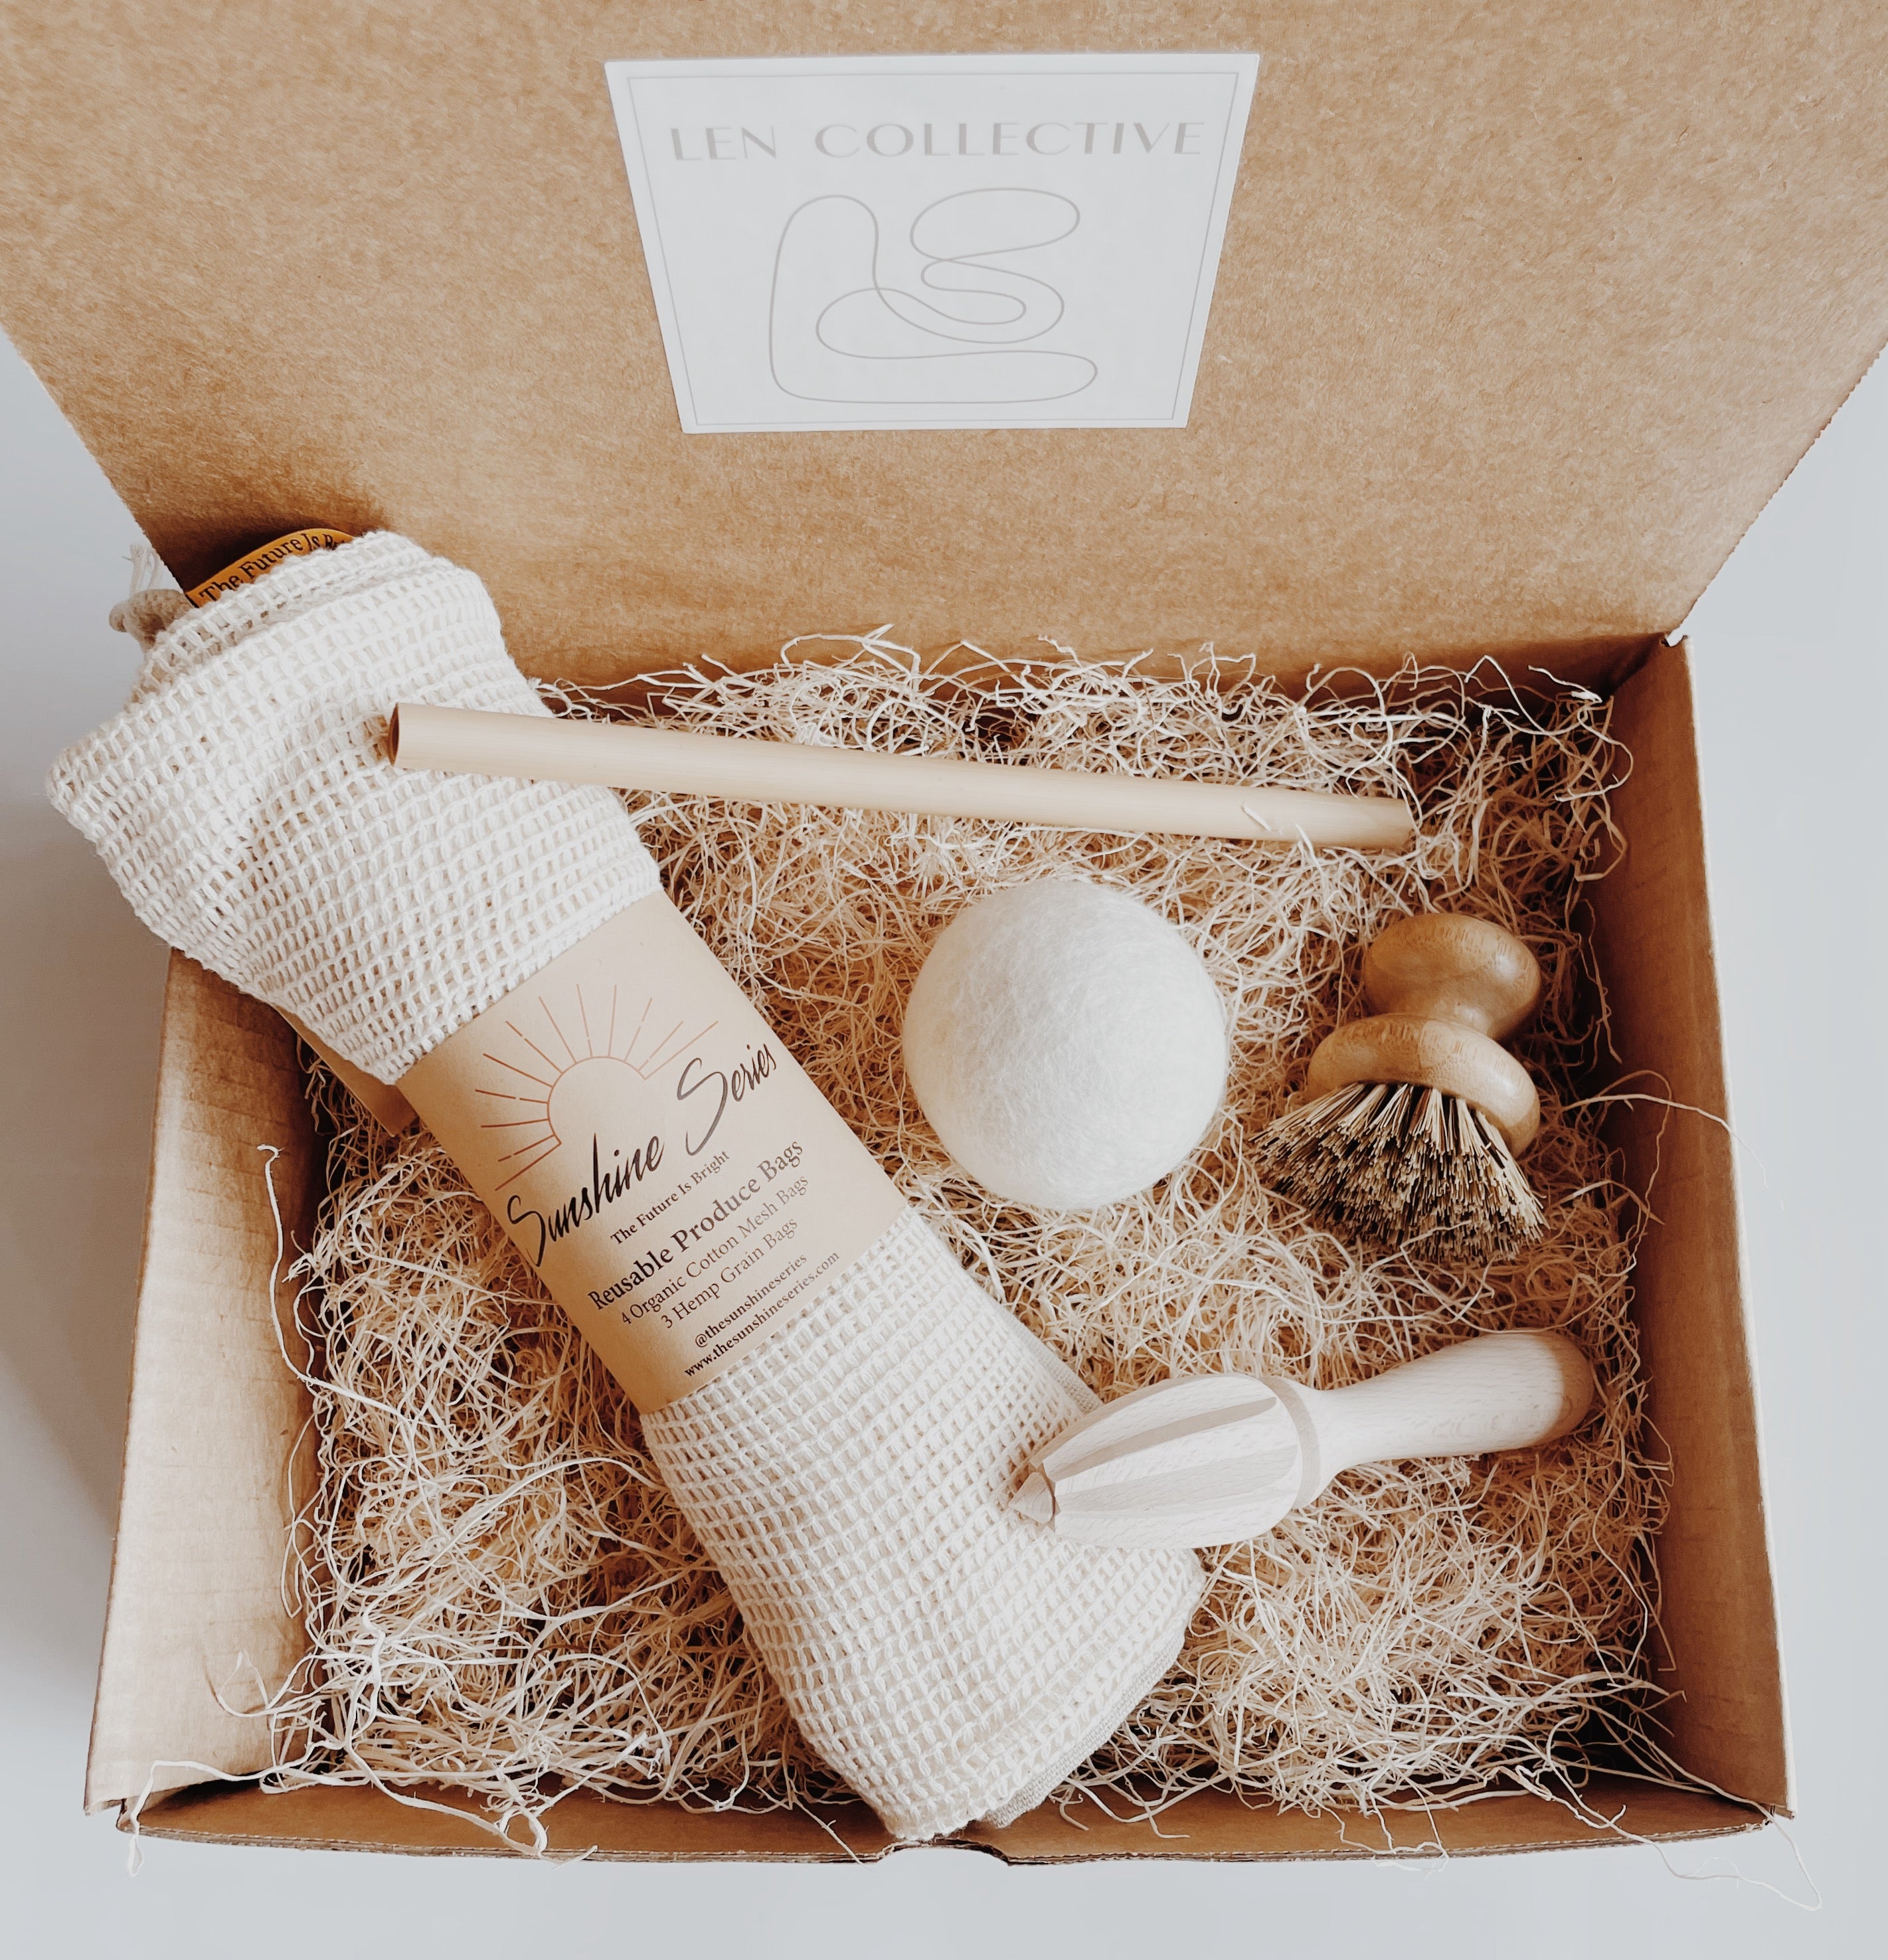 sustainable home care package